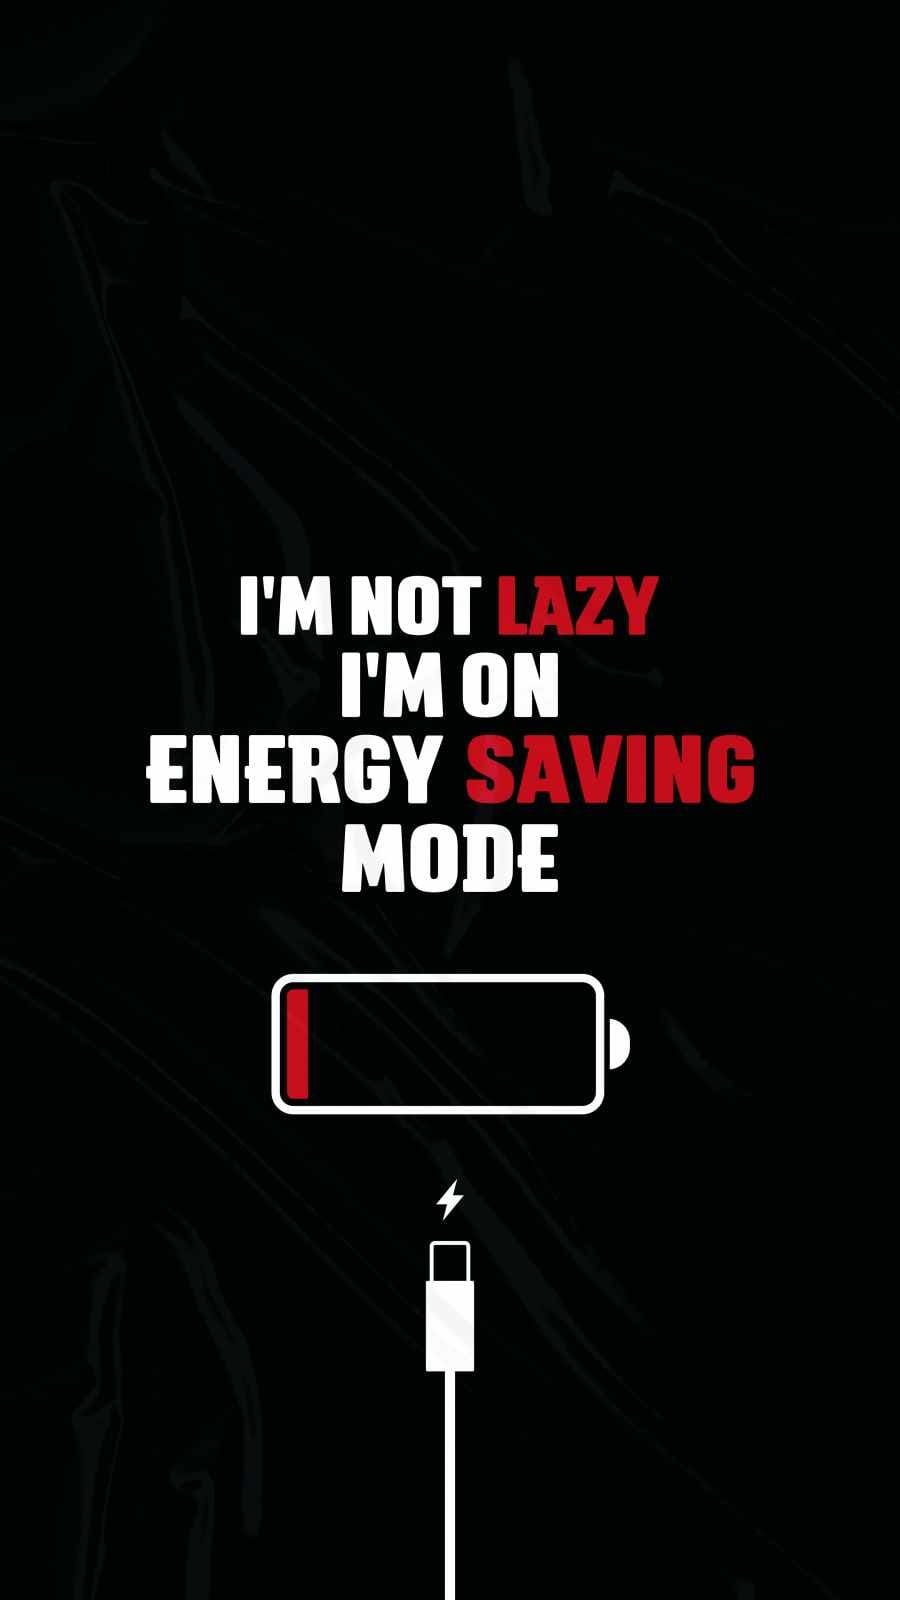 I am Not Lazy wallpapers iphone